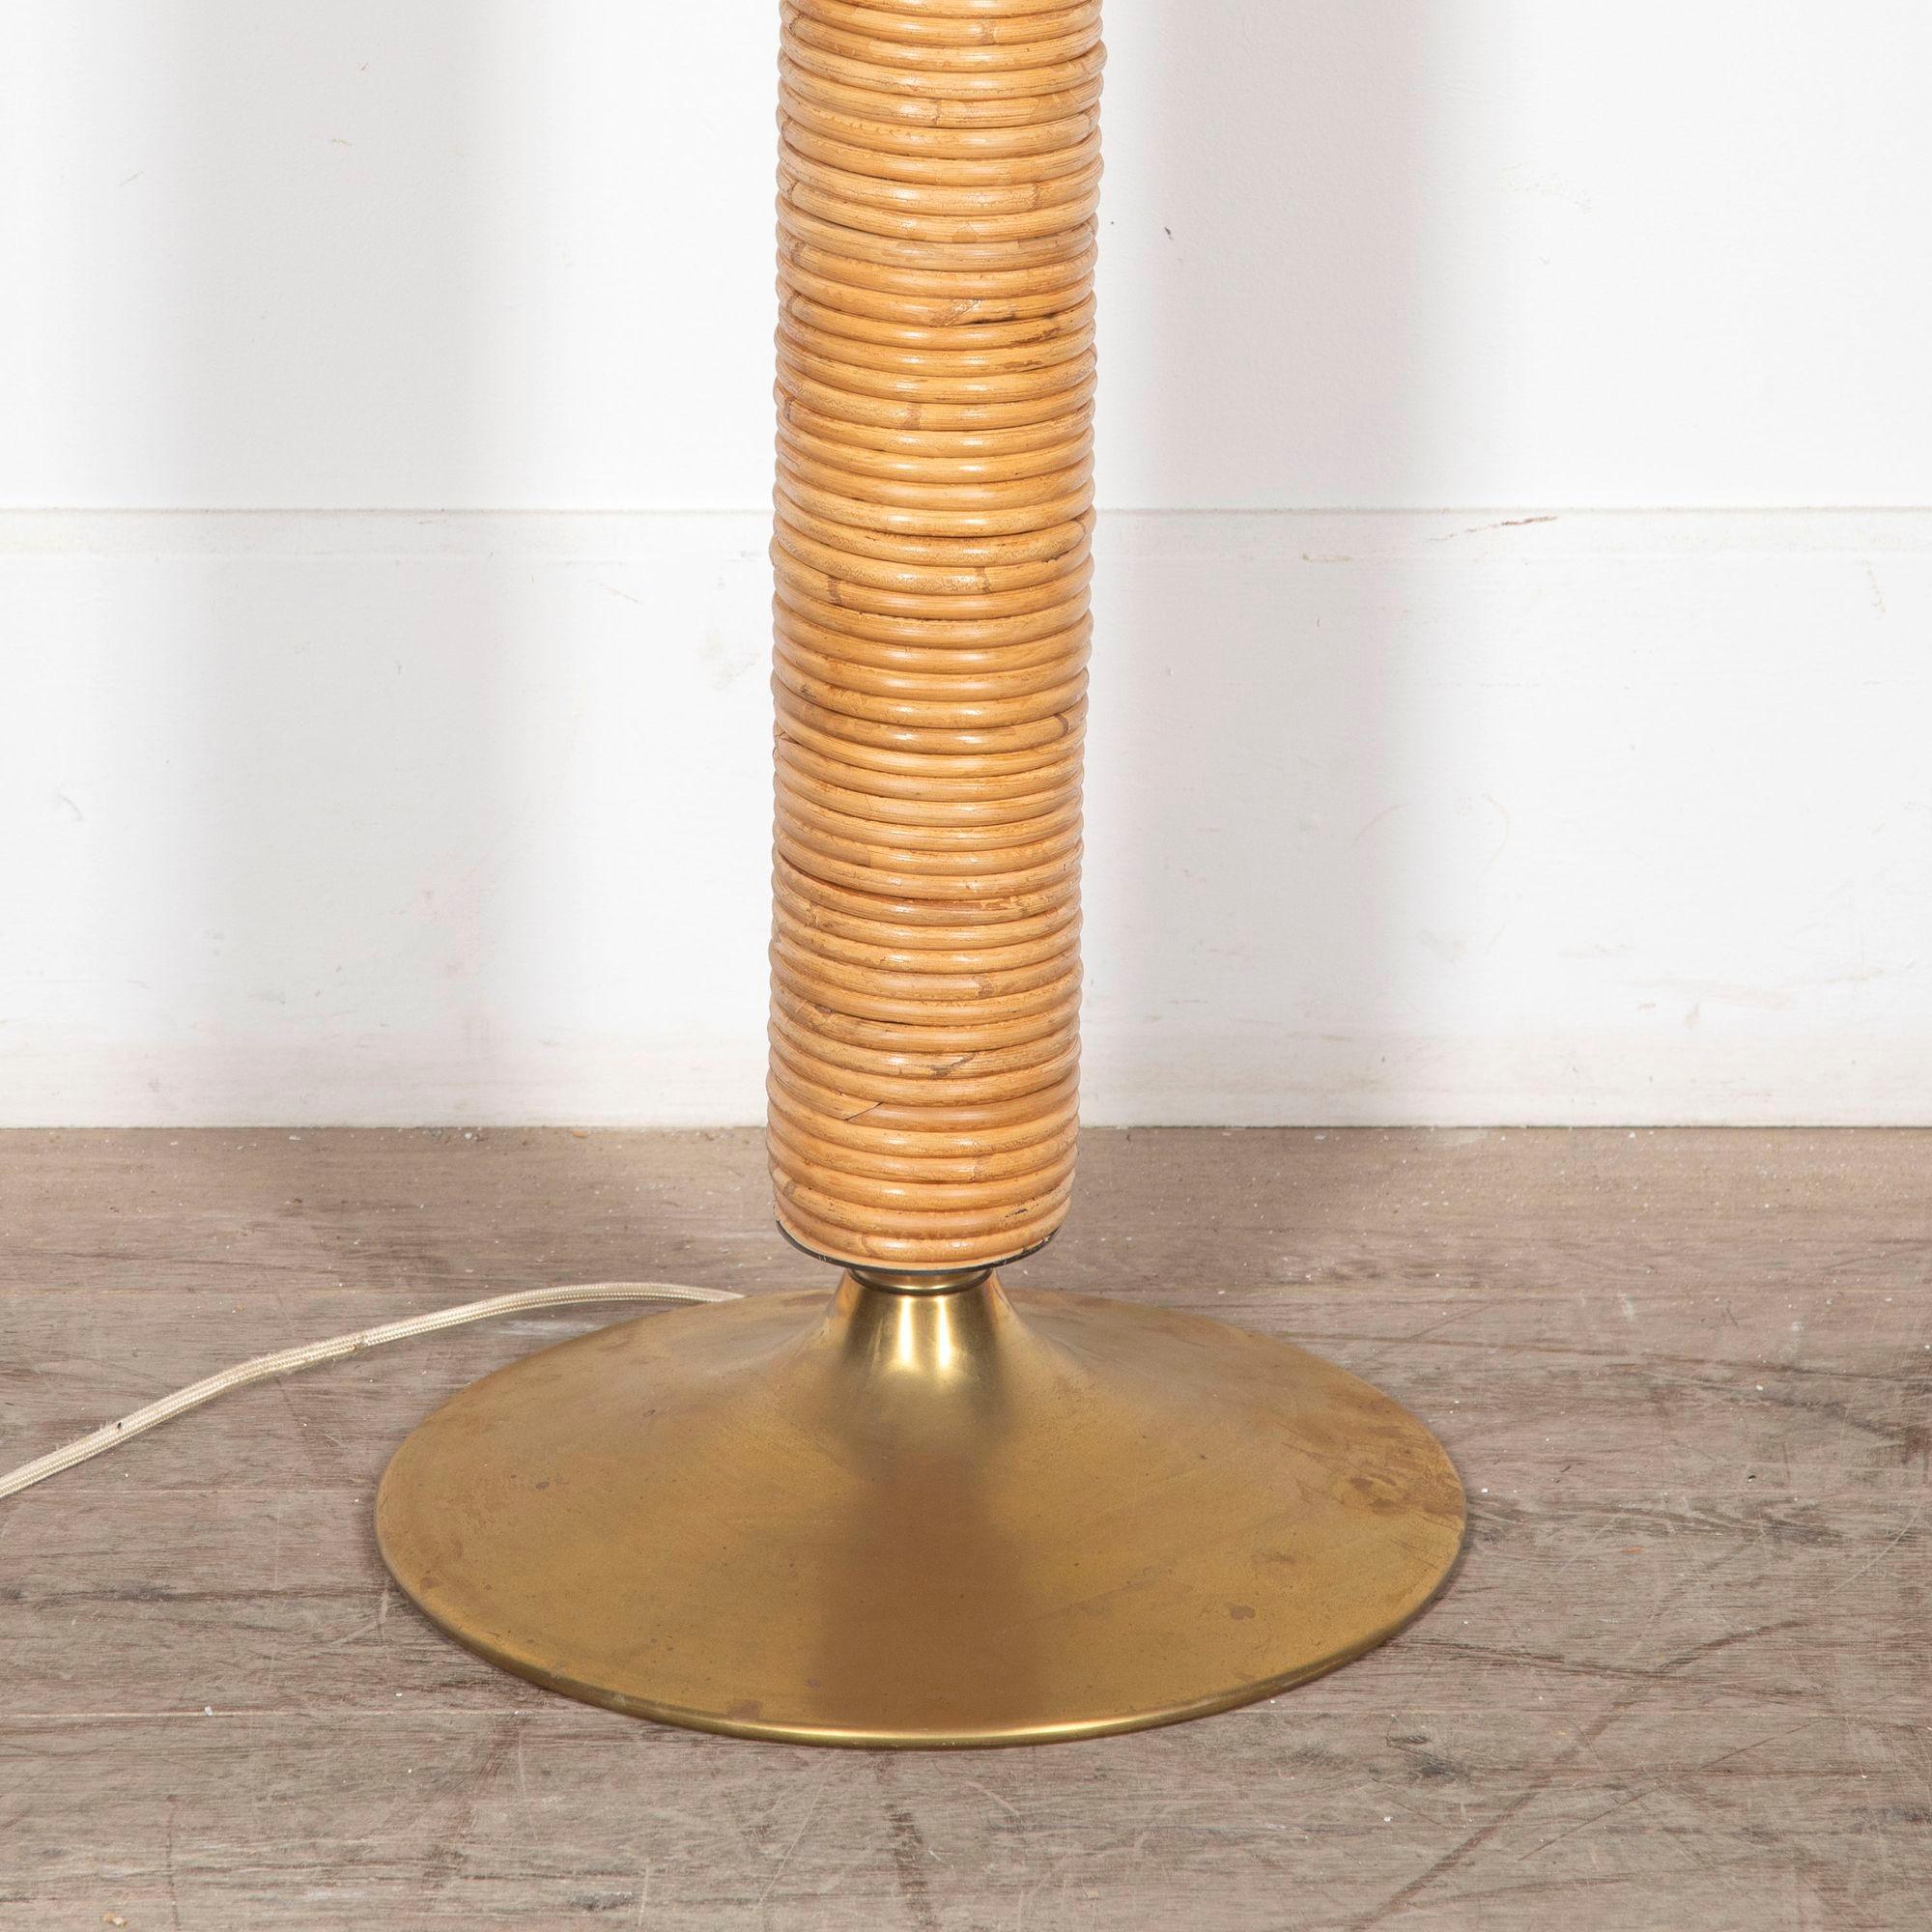 Modern Bamboo floor lamp of large proportions.
These lamps are in a Eco friendly design made out of natural materials.
Perfect accessory for any house. 
Please note, these lamps are currently undergoing our vetting process and do not currently